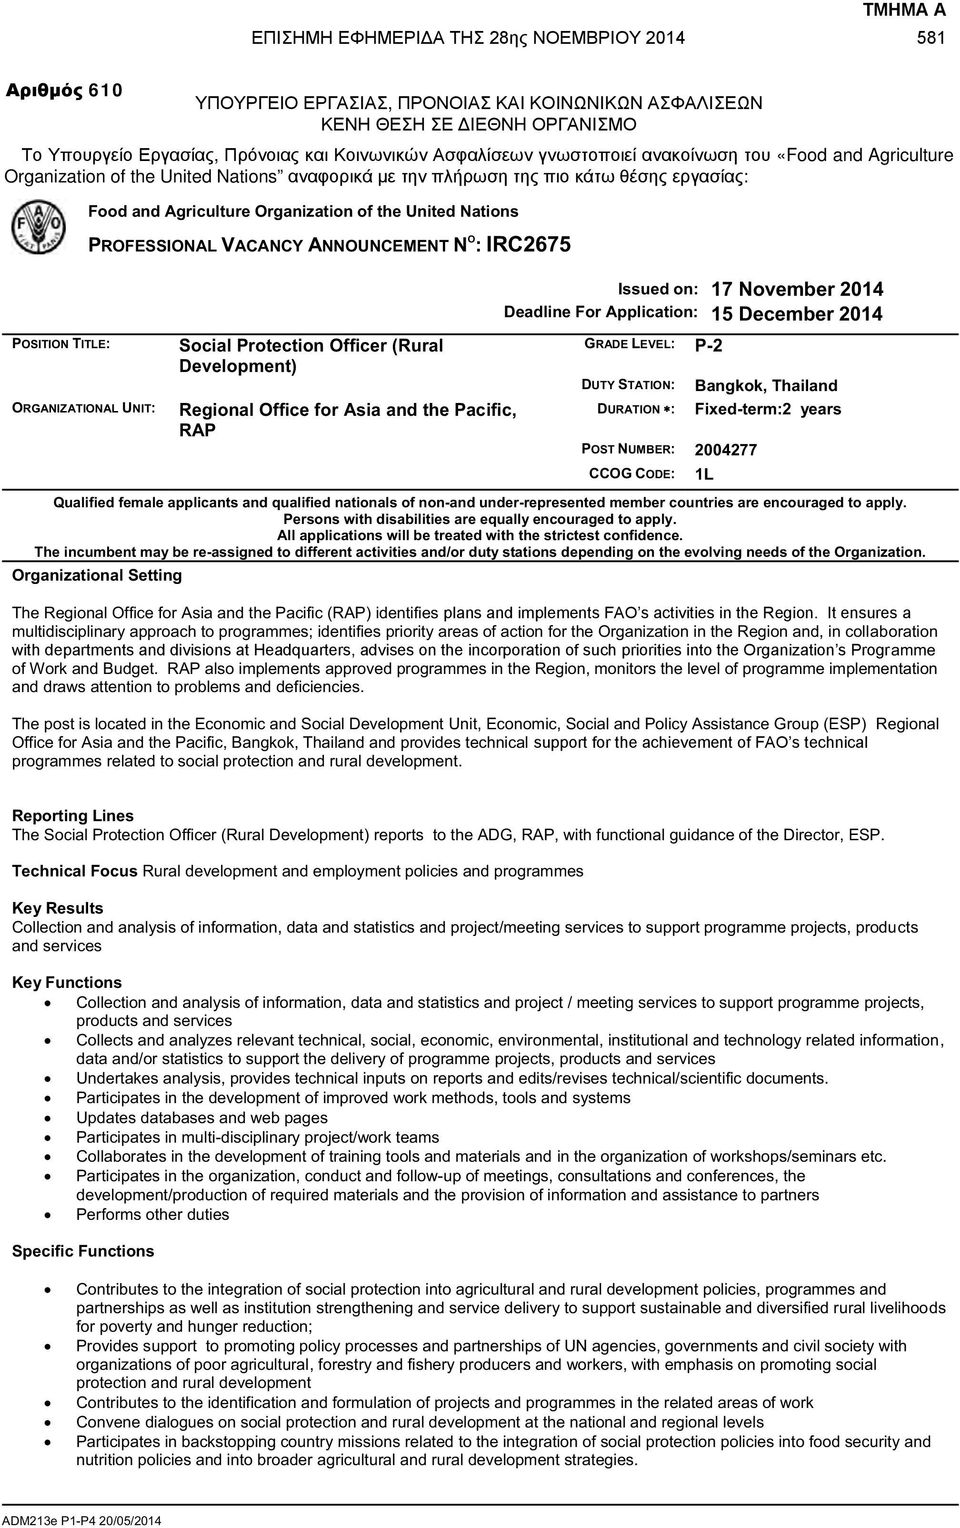 Agriculture Organization of the United Nations PROFESSIONAL VACANCY ANNOUNCEMENT N O : IRC2675 Social Protection Officer (Rural Development) Regional Office for Asia and the Pacific, RAP Issued on: